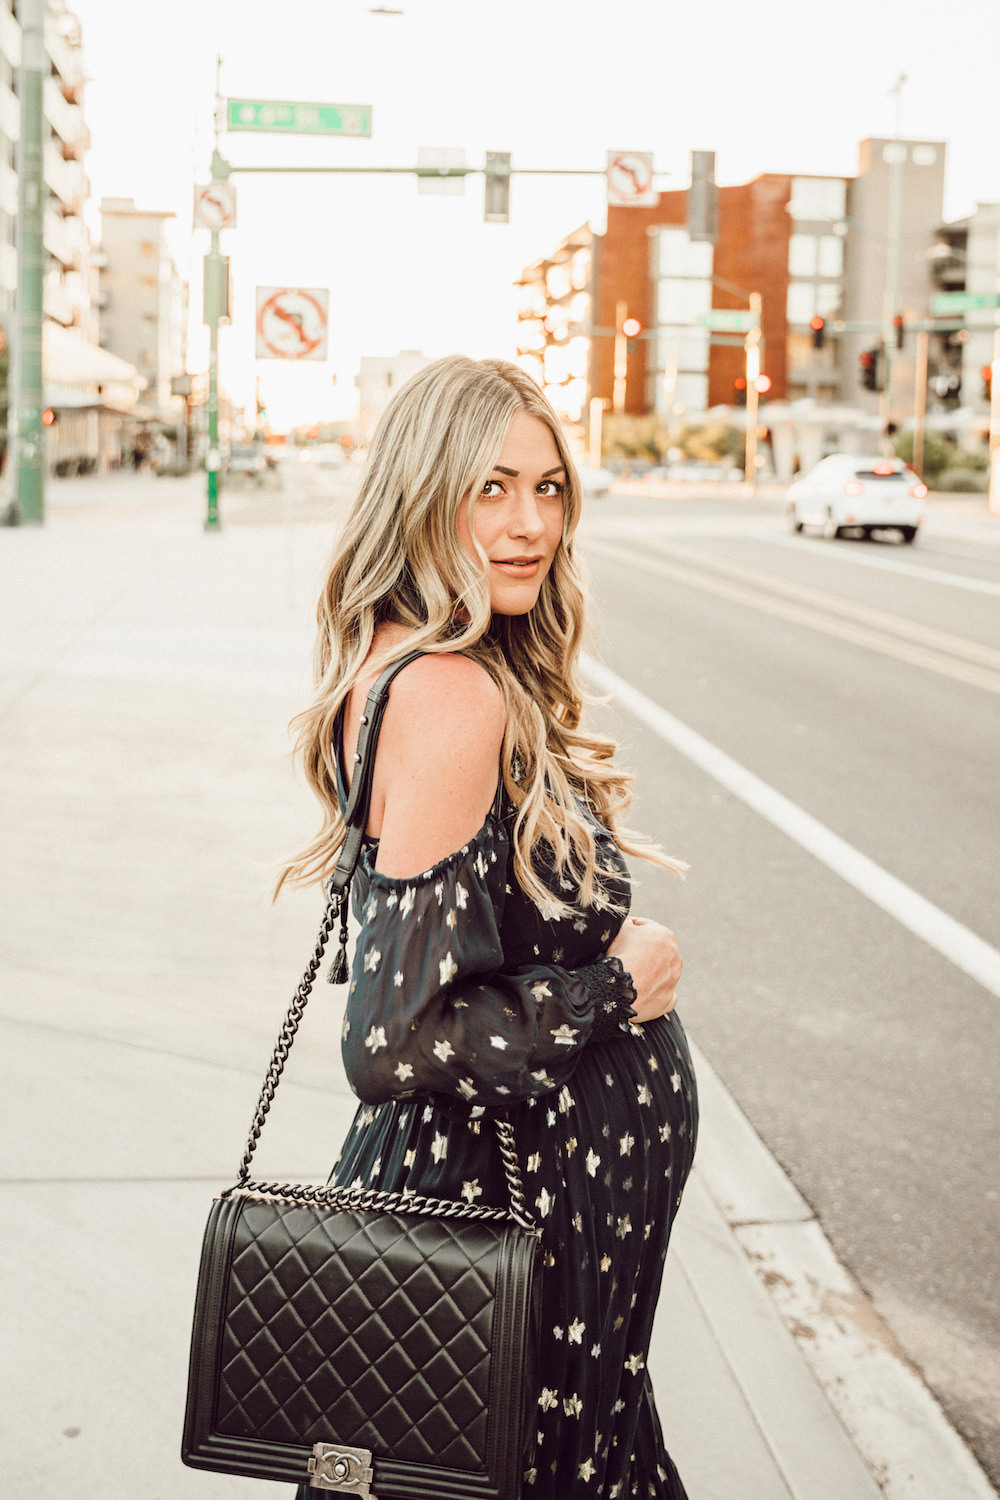 Dash of Darling | Star Dress Outfit and Maternity Style